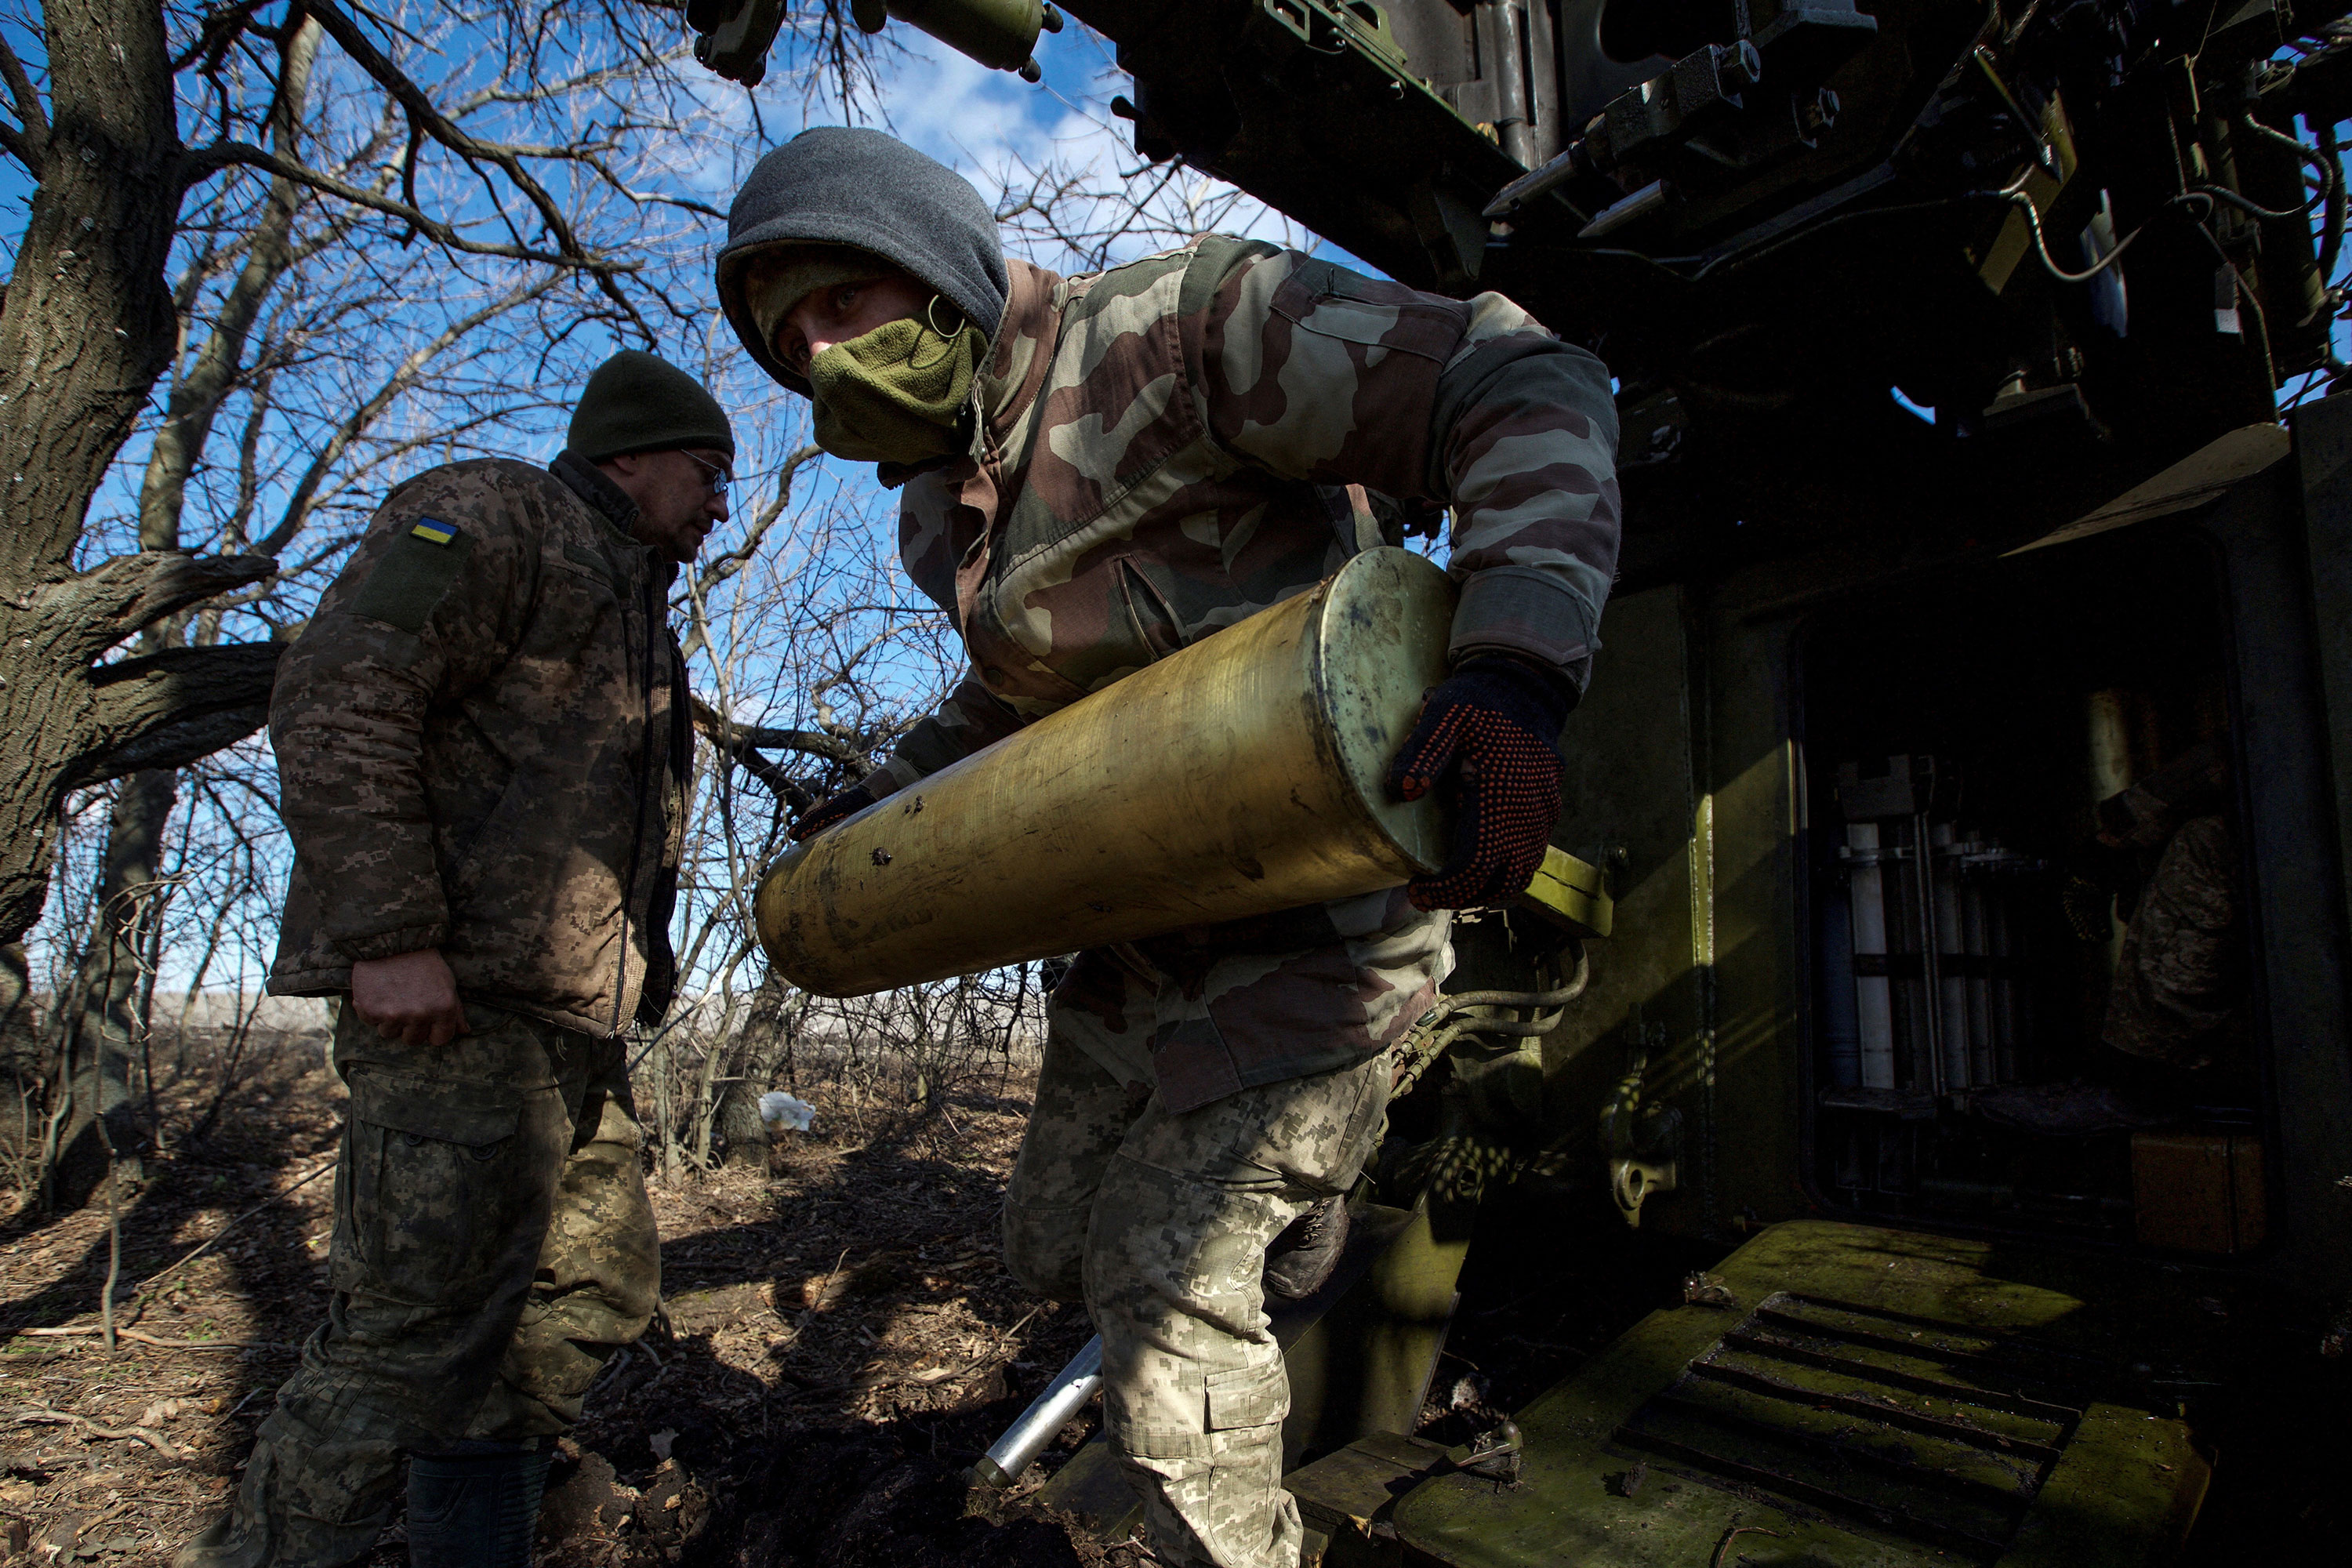 Ukraine says its forces continue to repel Russian attacks on Bakhmut